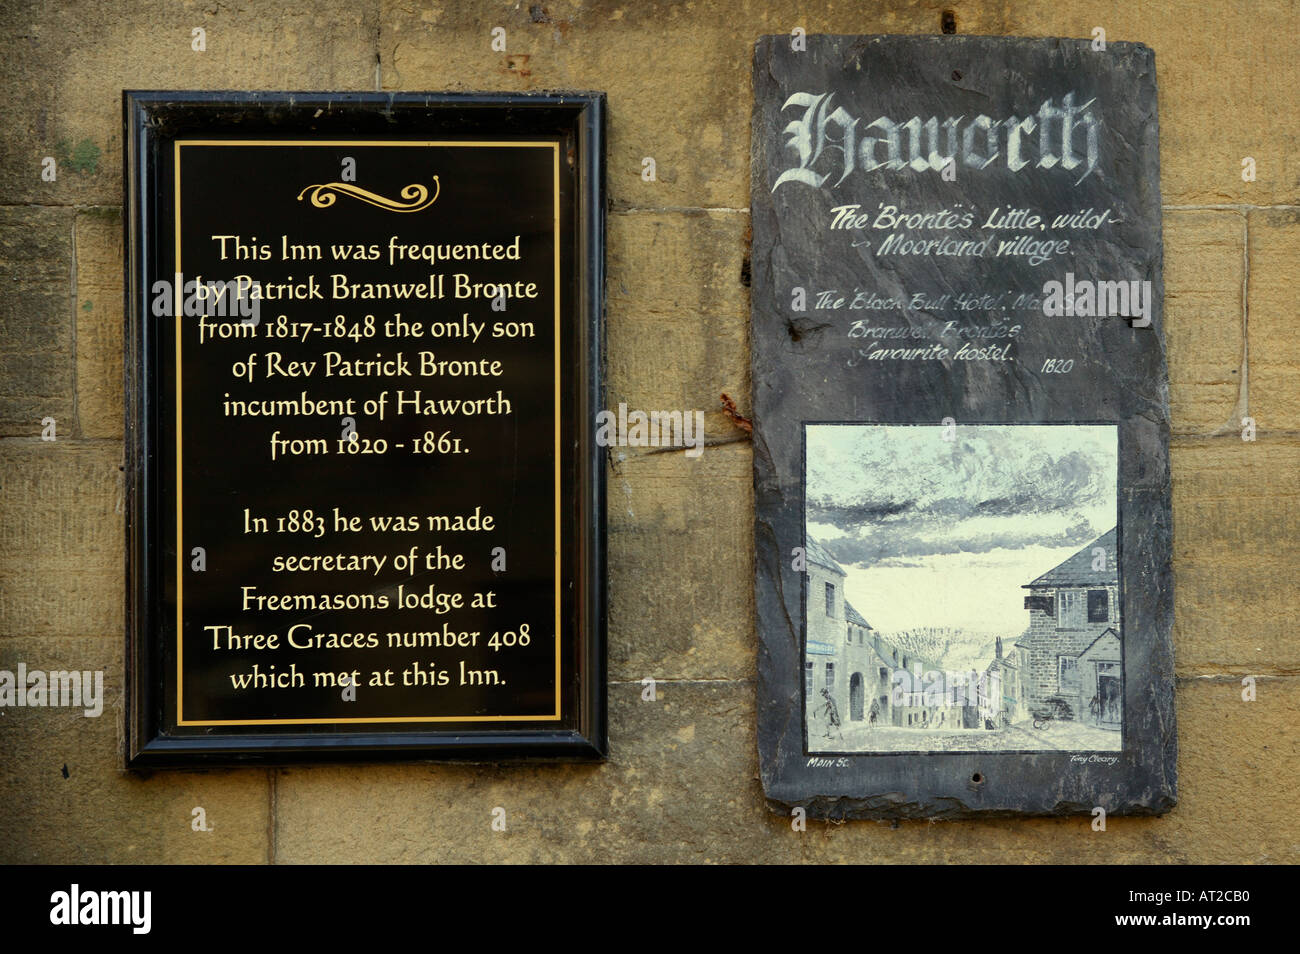 COMMEMORATIVE PLAQUE TO PATRICK BRANWELL BRONTE ON THE WALL OF THE BLACK BULL HOTEL HAWORTH VILLAGE YORKSHIRE ENGLAND Stock Photo